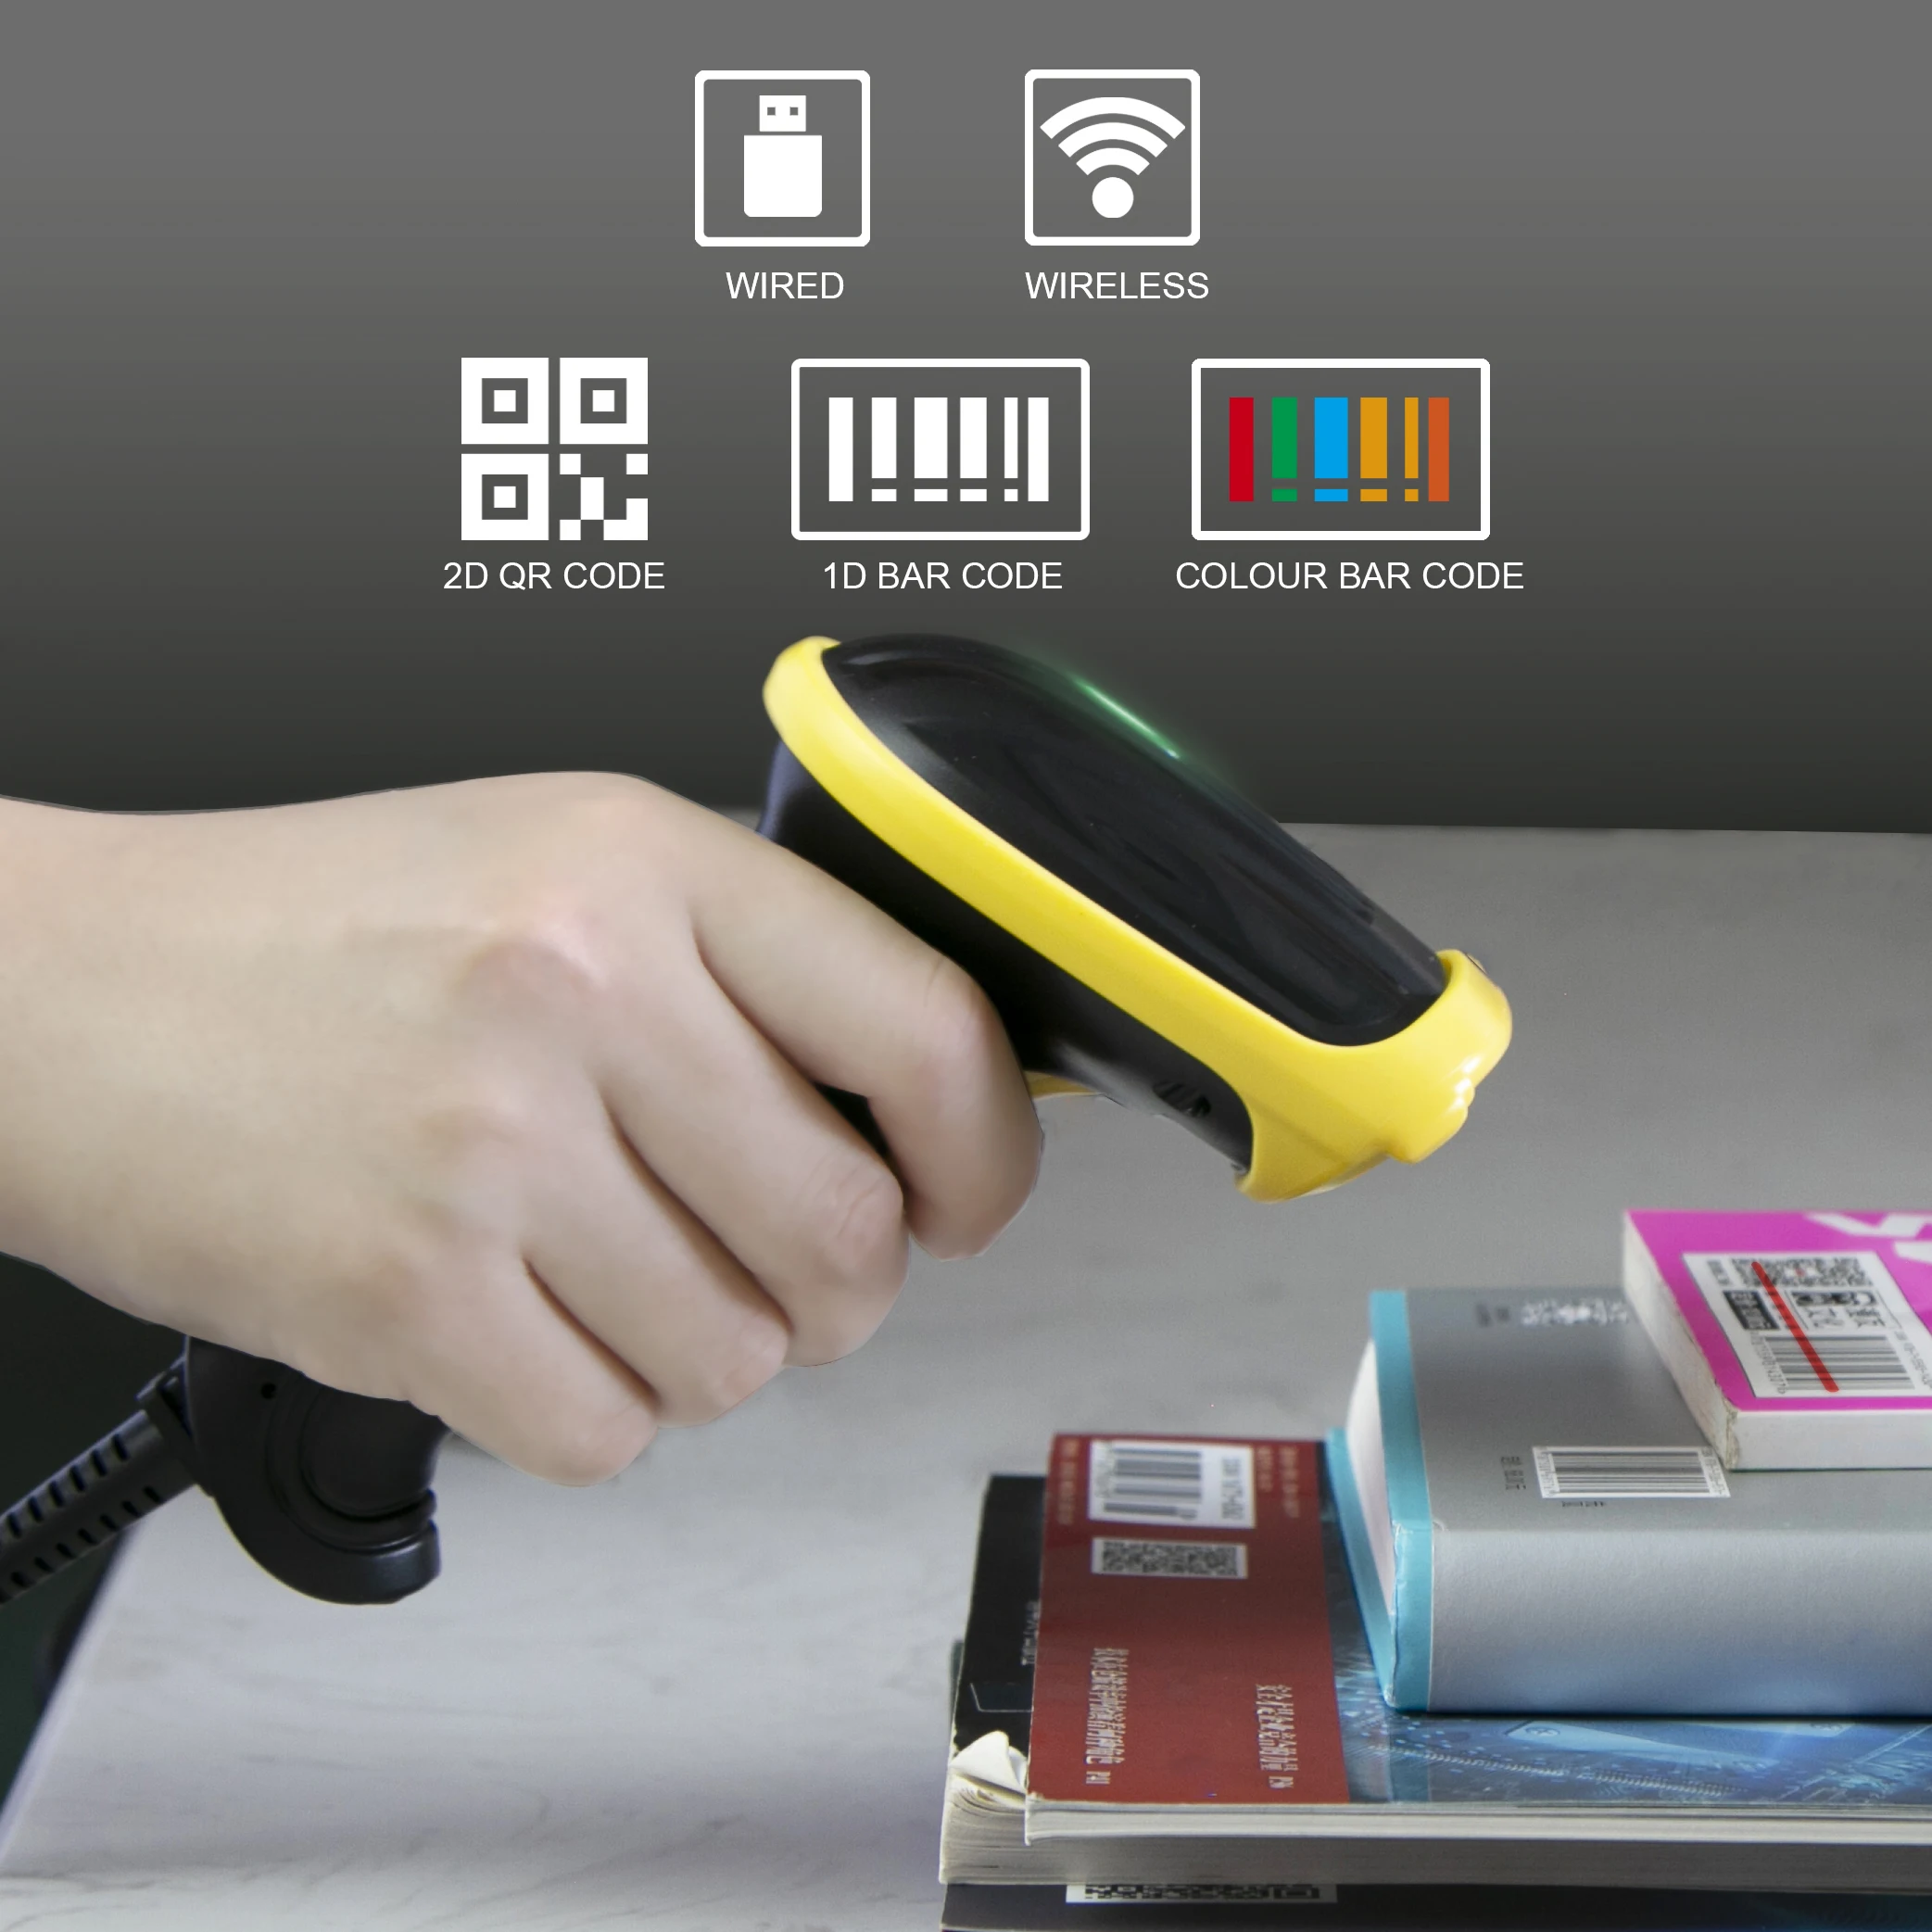 

1D QR 2D auto Barcode Scanner Handheld Bar Code Reader Android IOS LINUX MAC Use